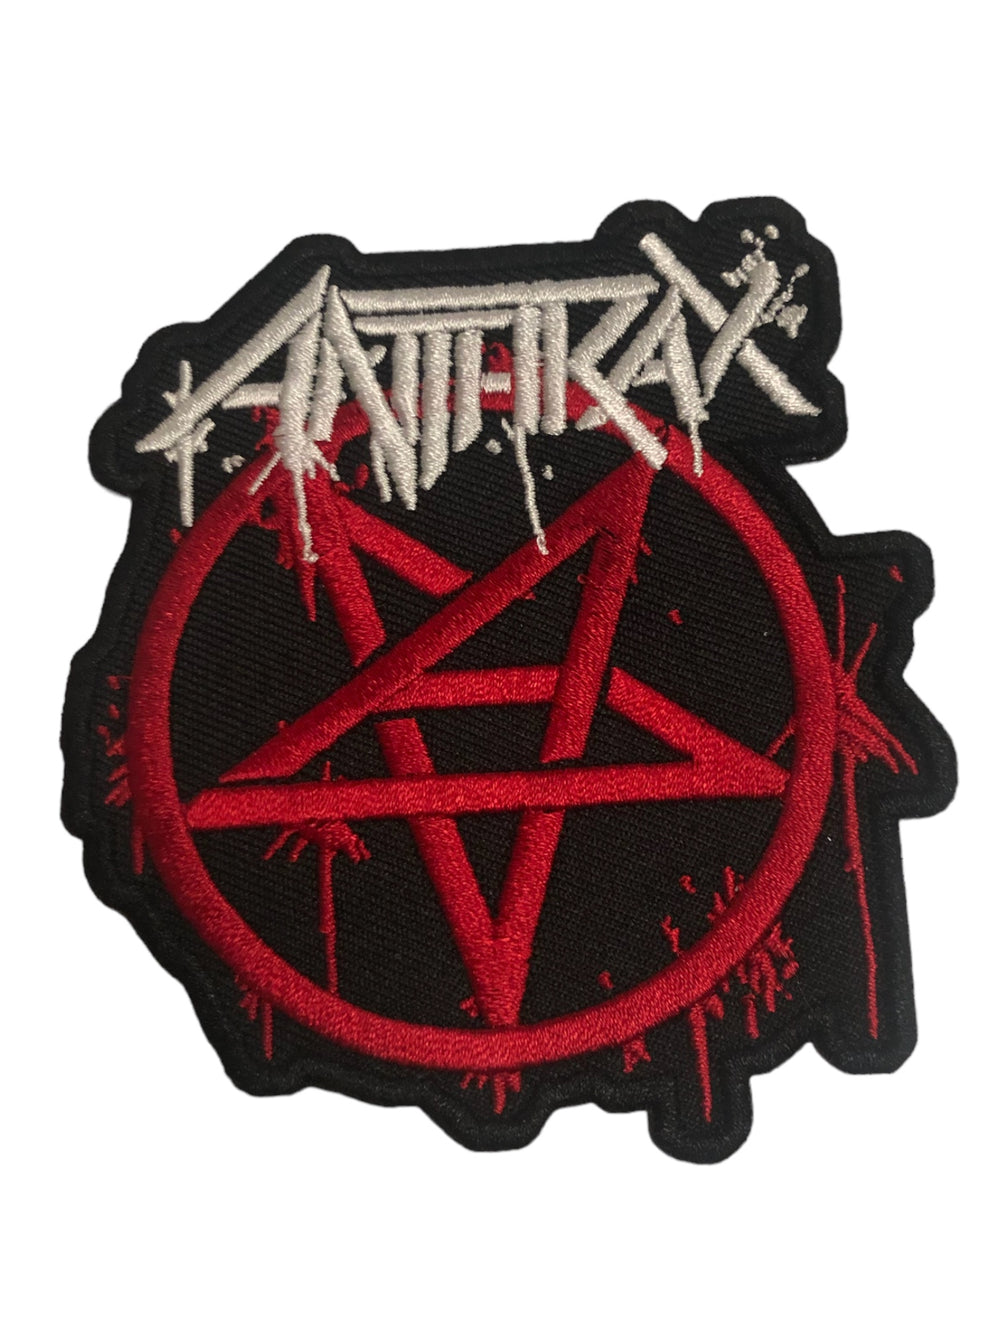 Anthrax  Pentagram Official Woven Patch Brand New